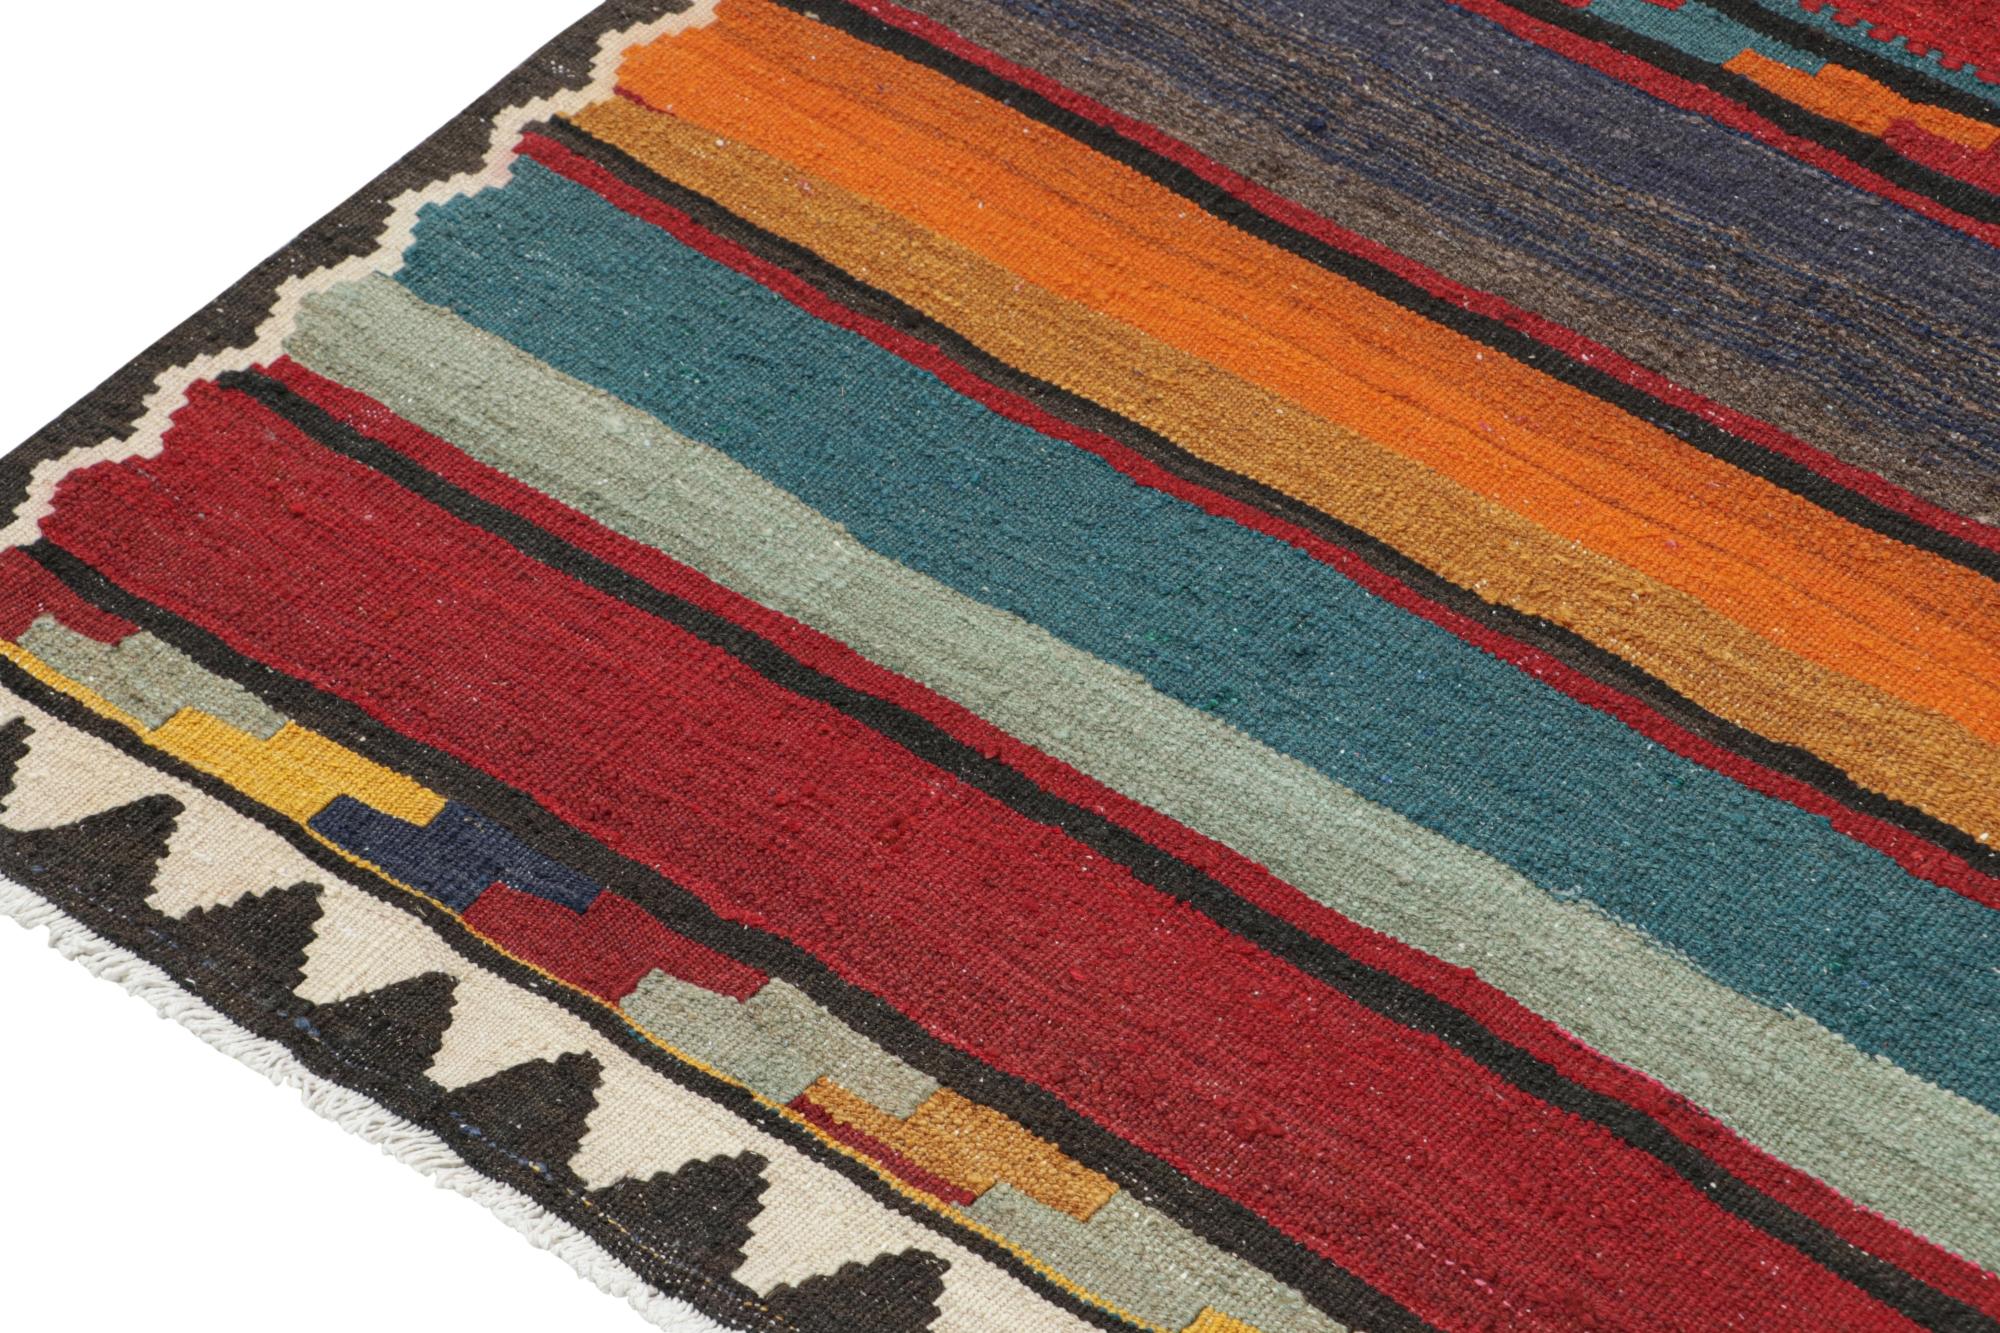 Mid-20th Century Vintage Northwest Persian Kilim with Stripes & Geometric Patterns For Sale